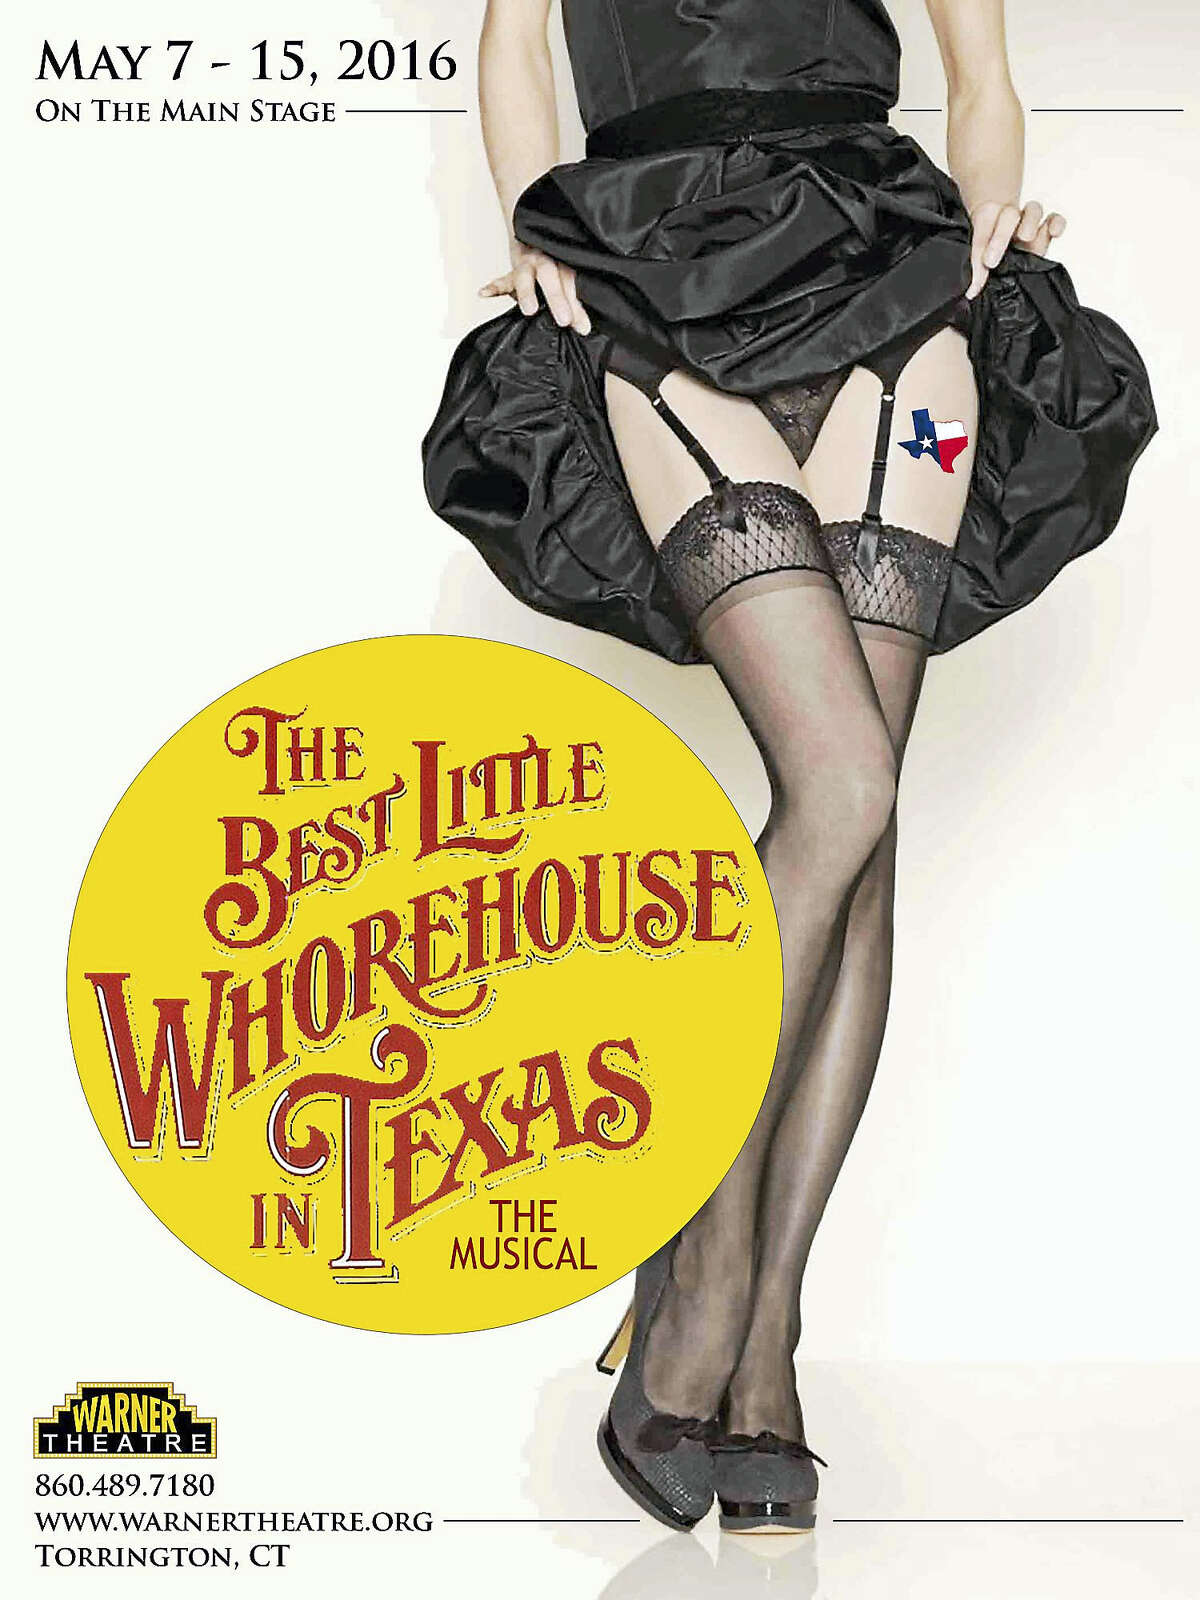 Contributed photoThe Warner Stage Company's production of "The Best Little Whorehouse in Texas" opens Saturday at the Warner Theatre in Torrington.